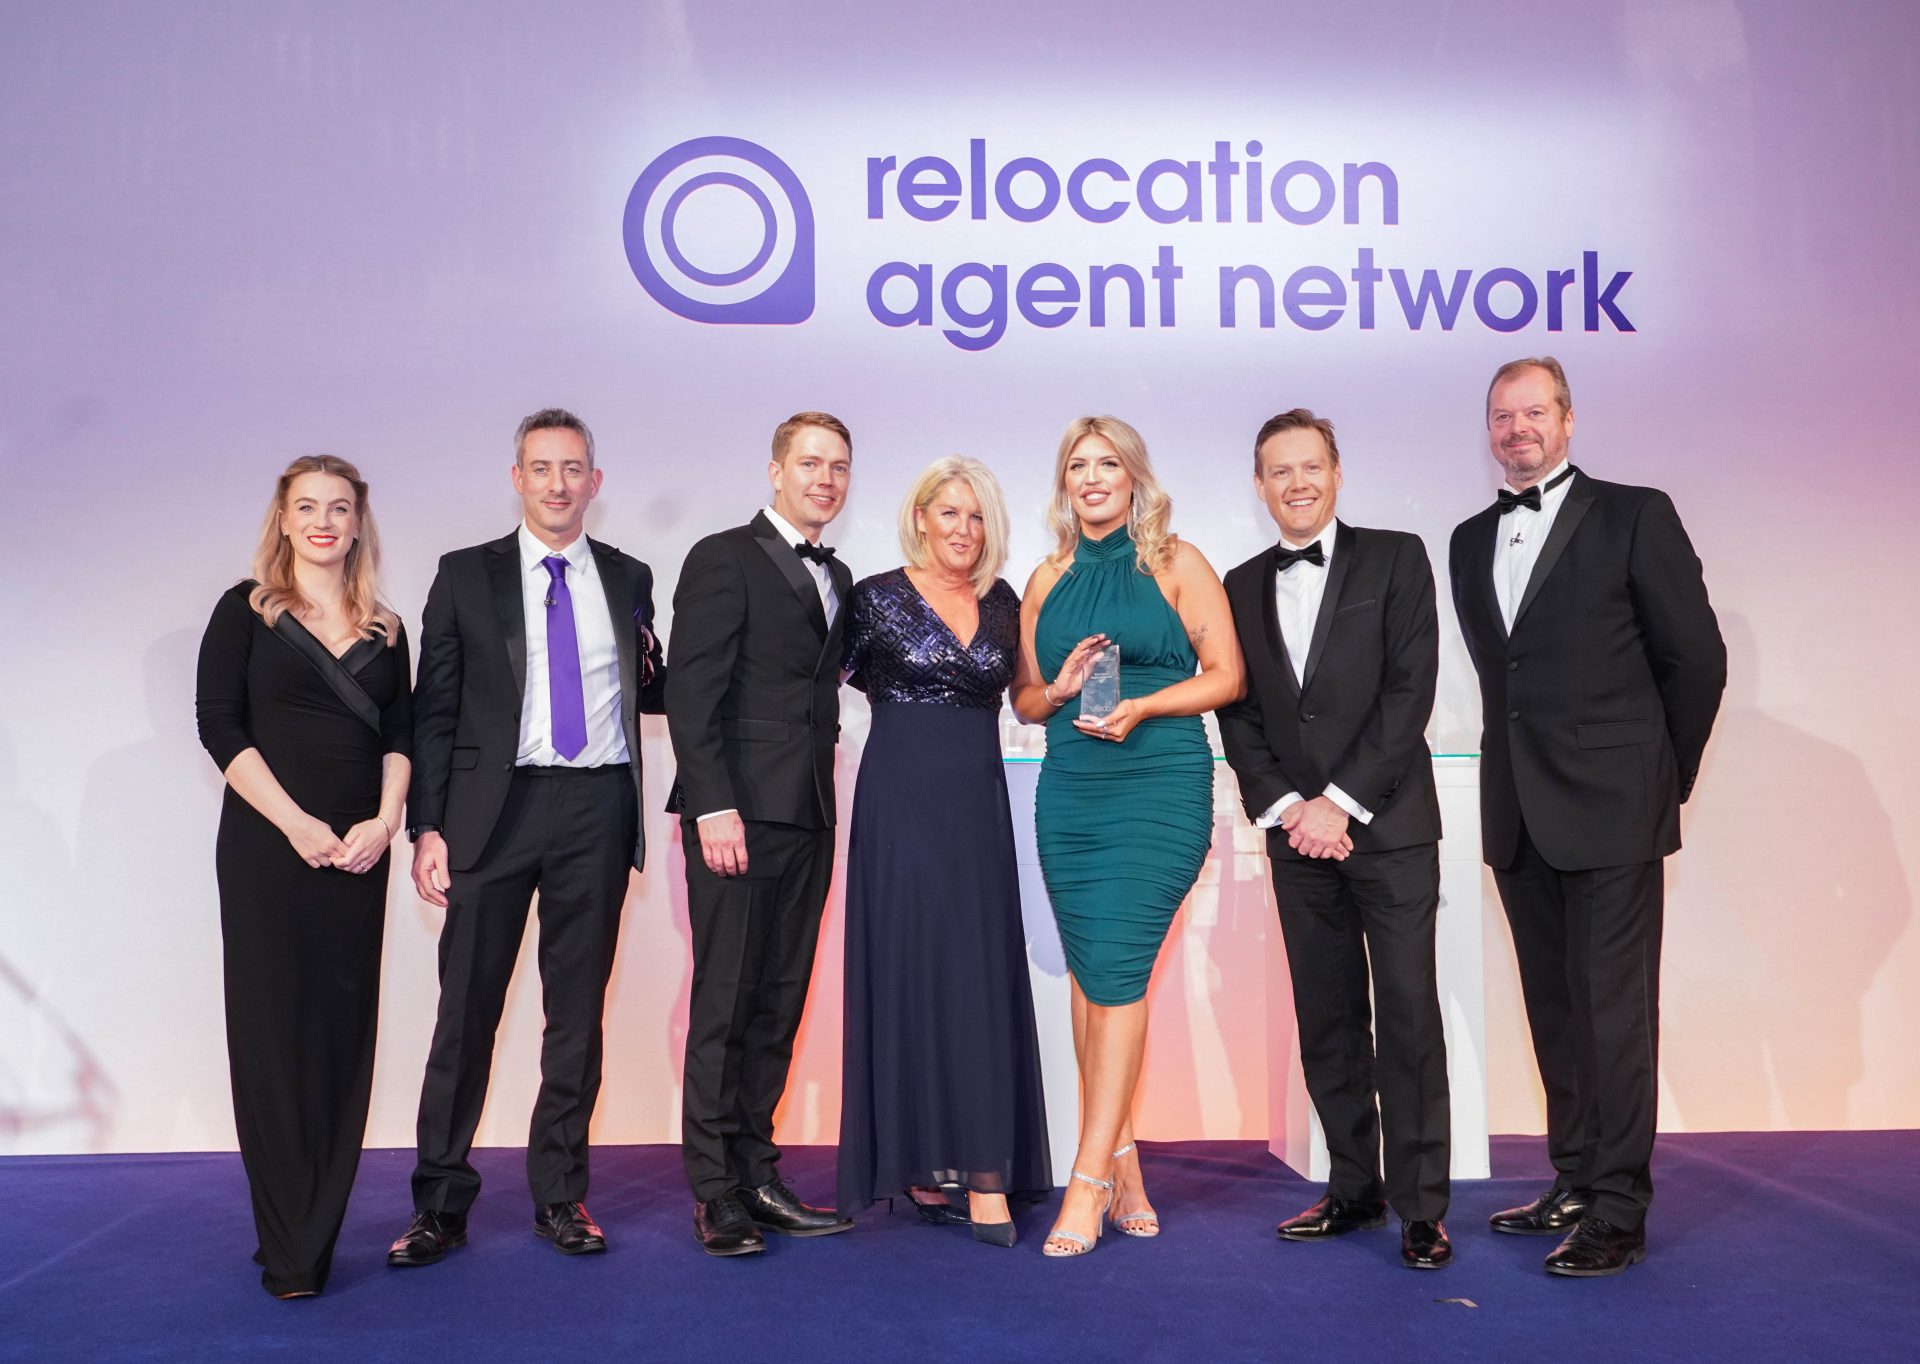 Awarded Best Agent in the Thames Valley Region!